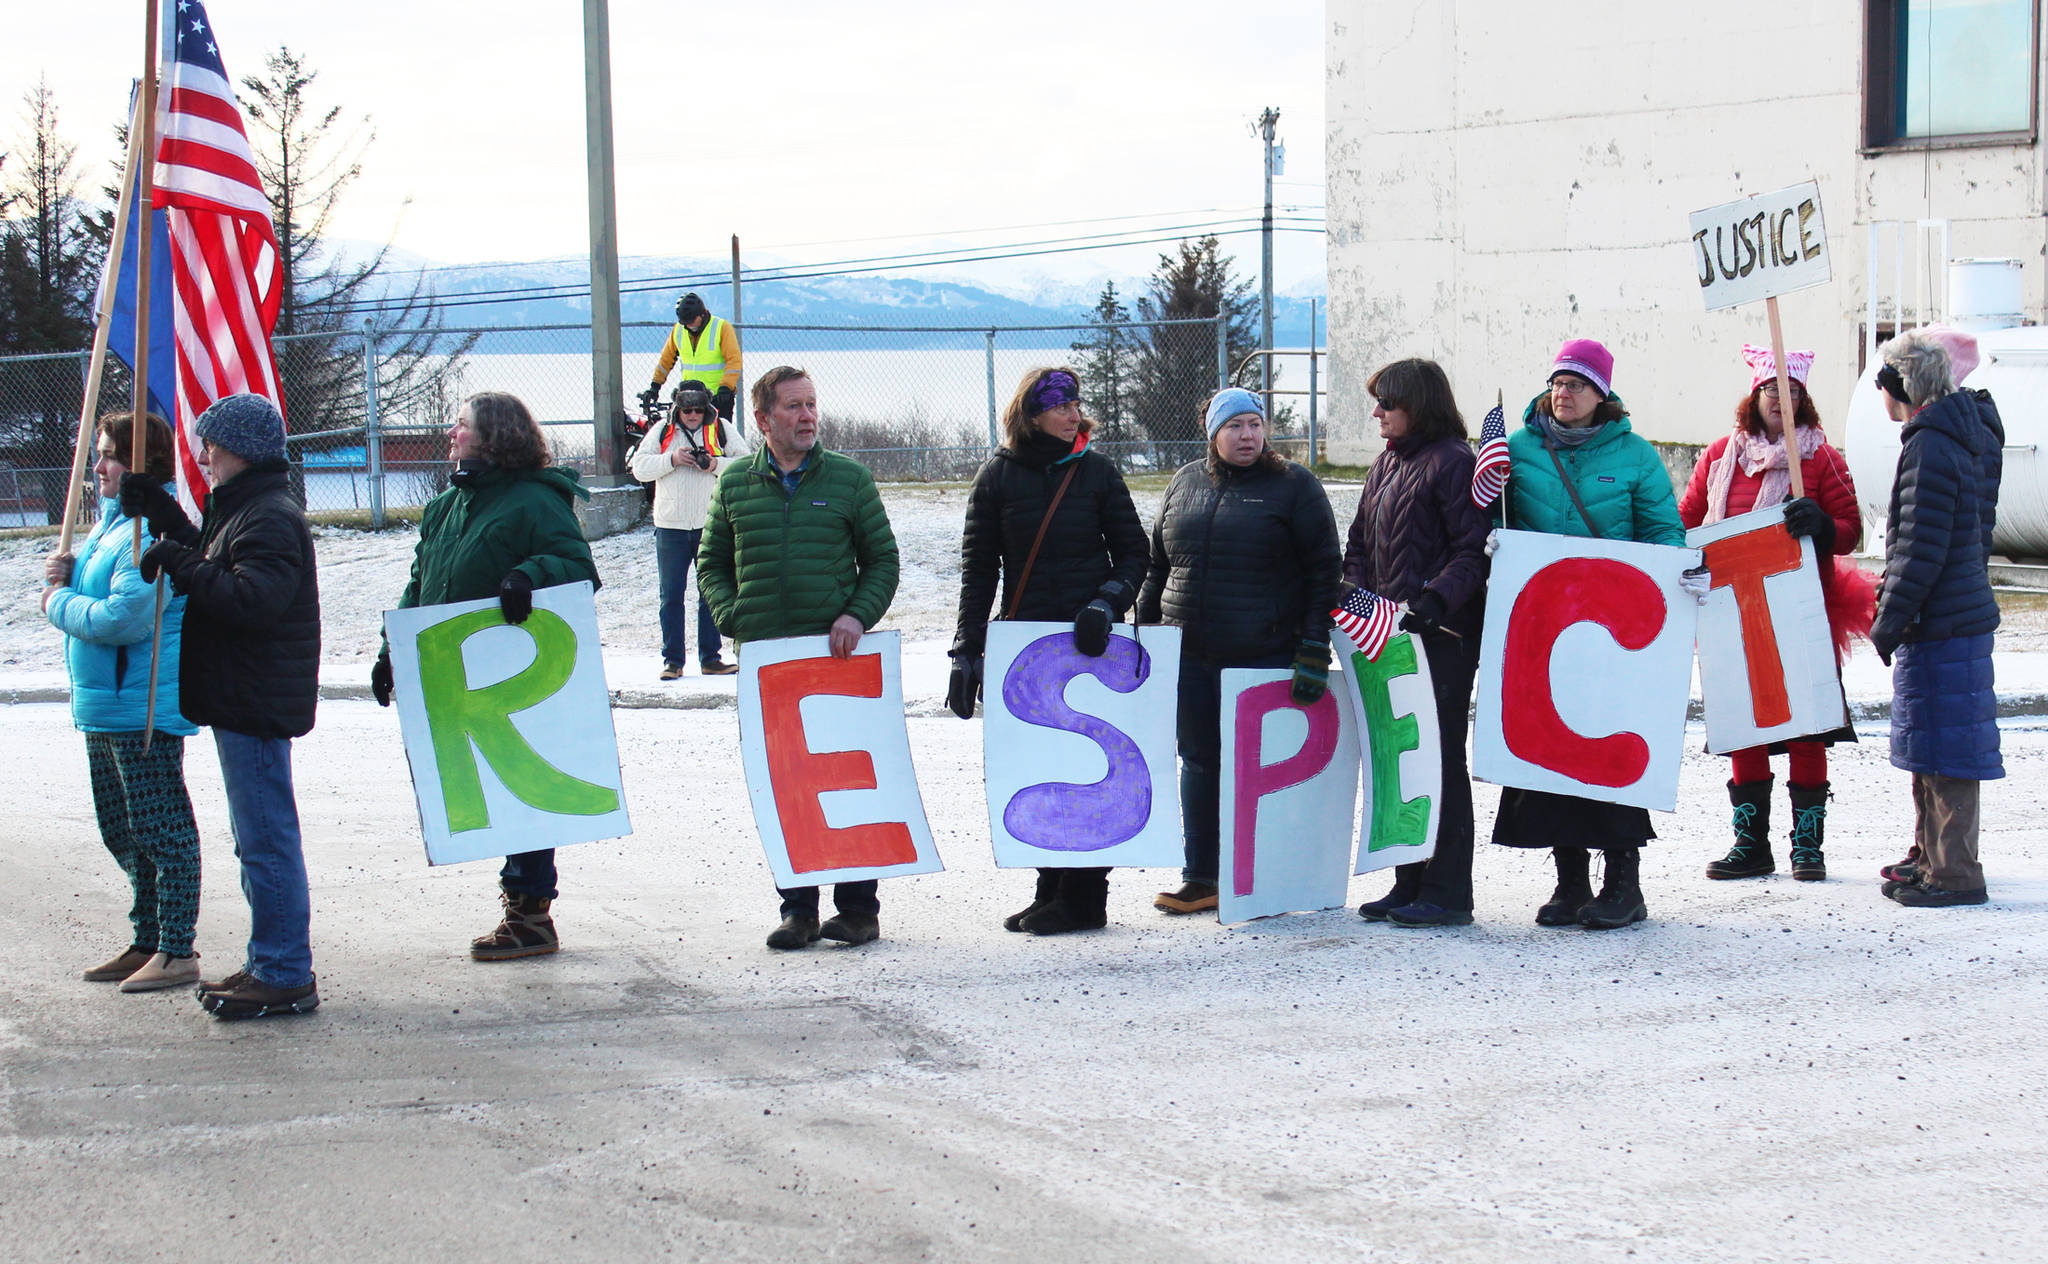 Homer area residents line up to march down Pioneer Avenue during the Women’s March on Homer 2018 on Saturday, Jan. 20, 2018 in Homer, Alaska. (Photo by Megan Pacer/Homer News)